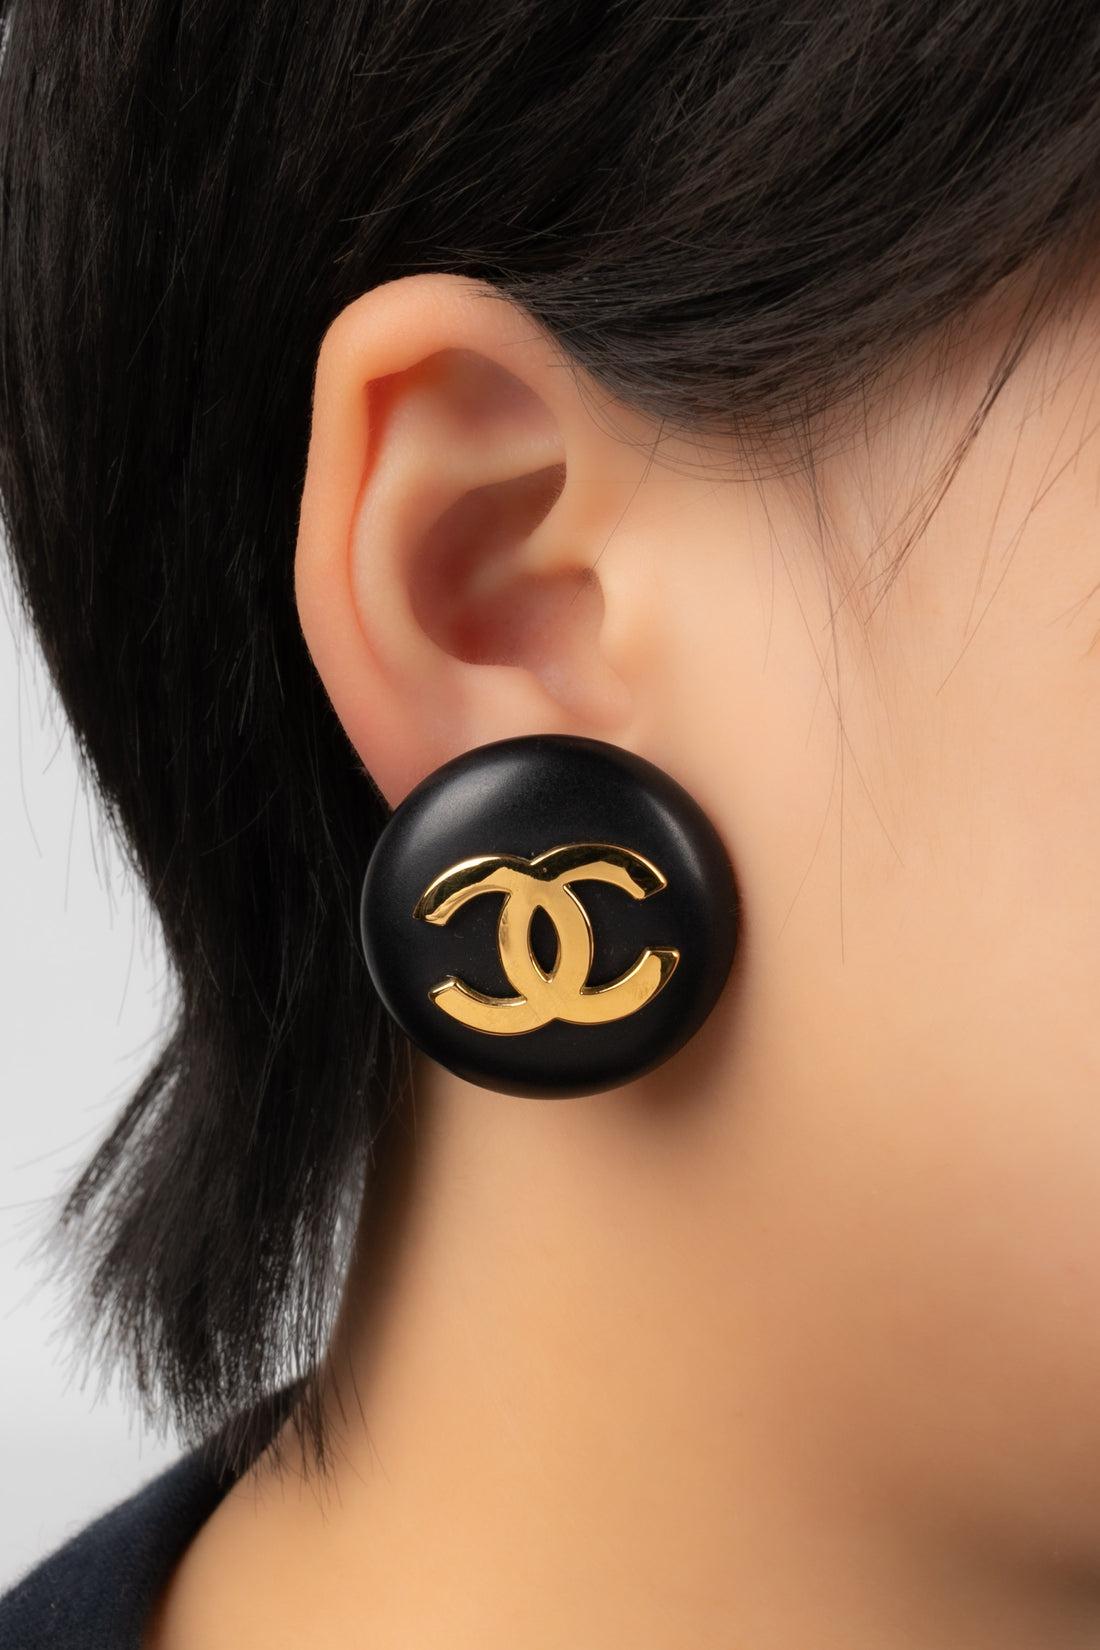 Chanel - (Made in France) Clip-on earrings in golden metal and bakelite topped with a cc logo. 2cc4 Collection.

Additional information:
Condition: Very good condition
Dimensions: Diameter: 3.5 cm

Seller Reference: BOB93